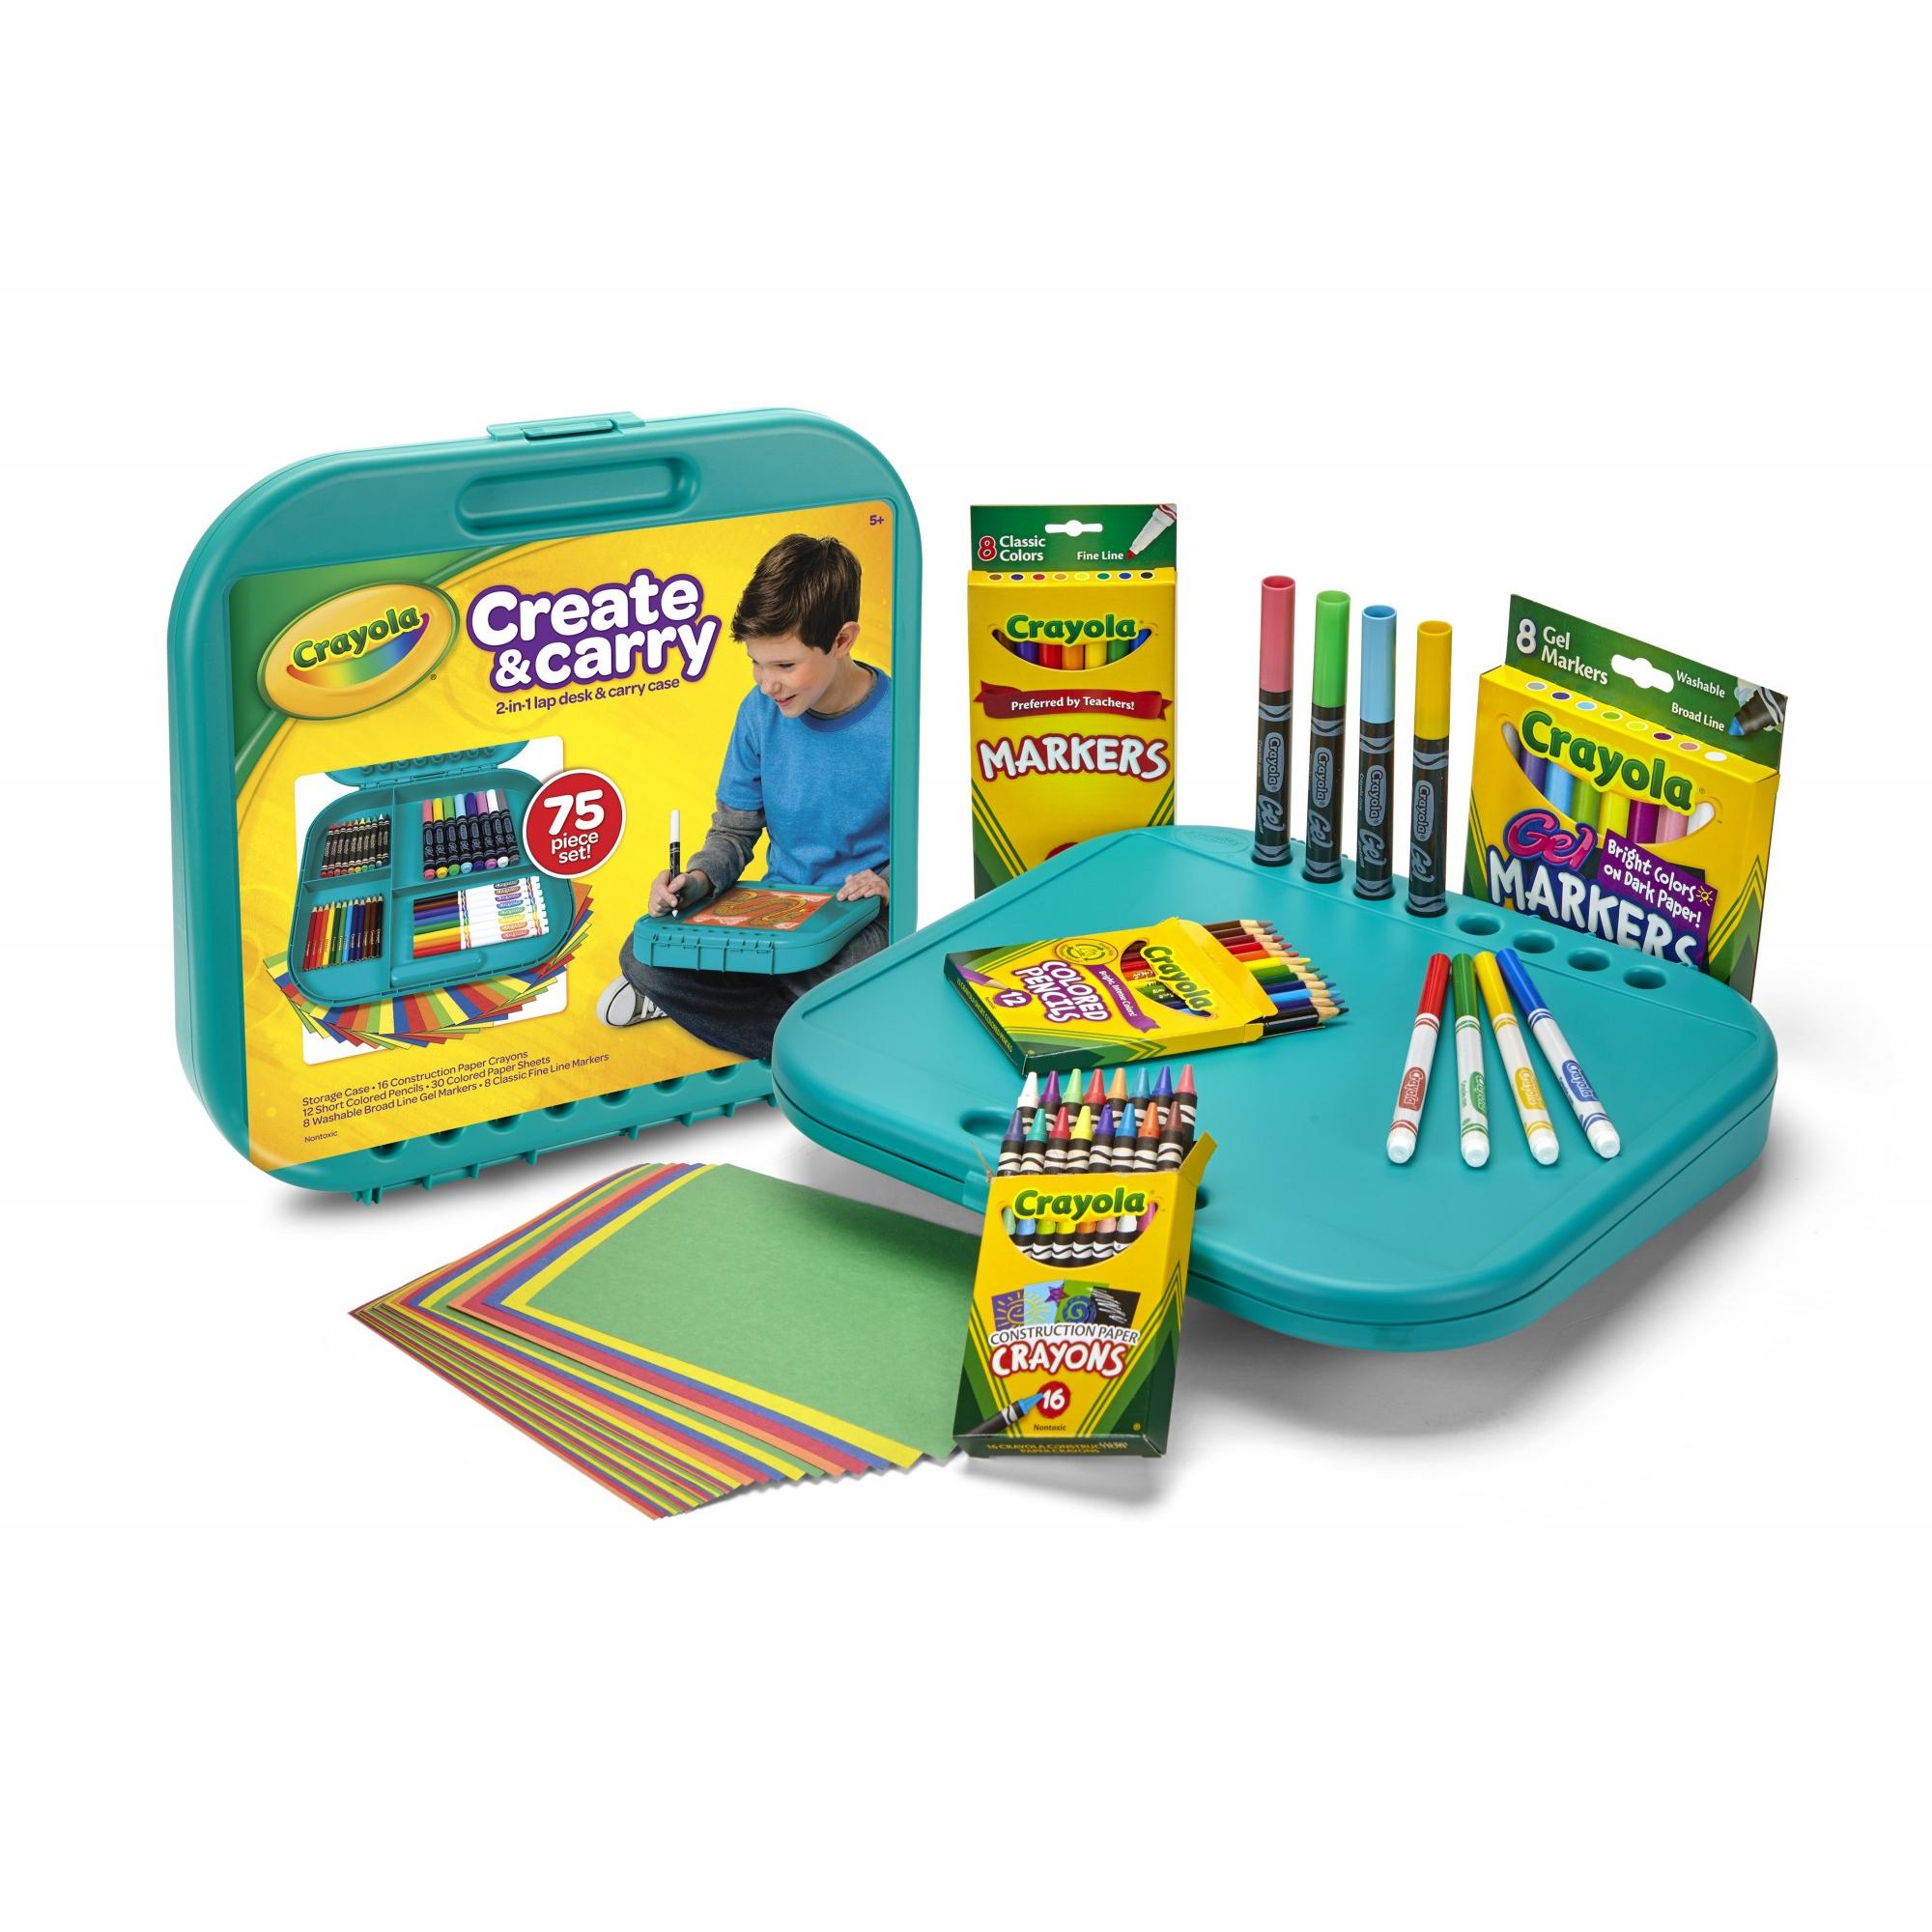 Crayola Create and Carry Art Coloring Set, Child Ages 5+, 75 Pieces - image 1 of 8